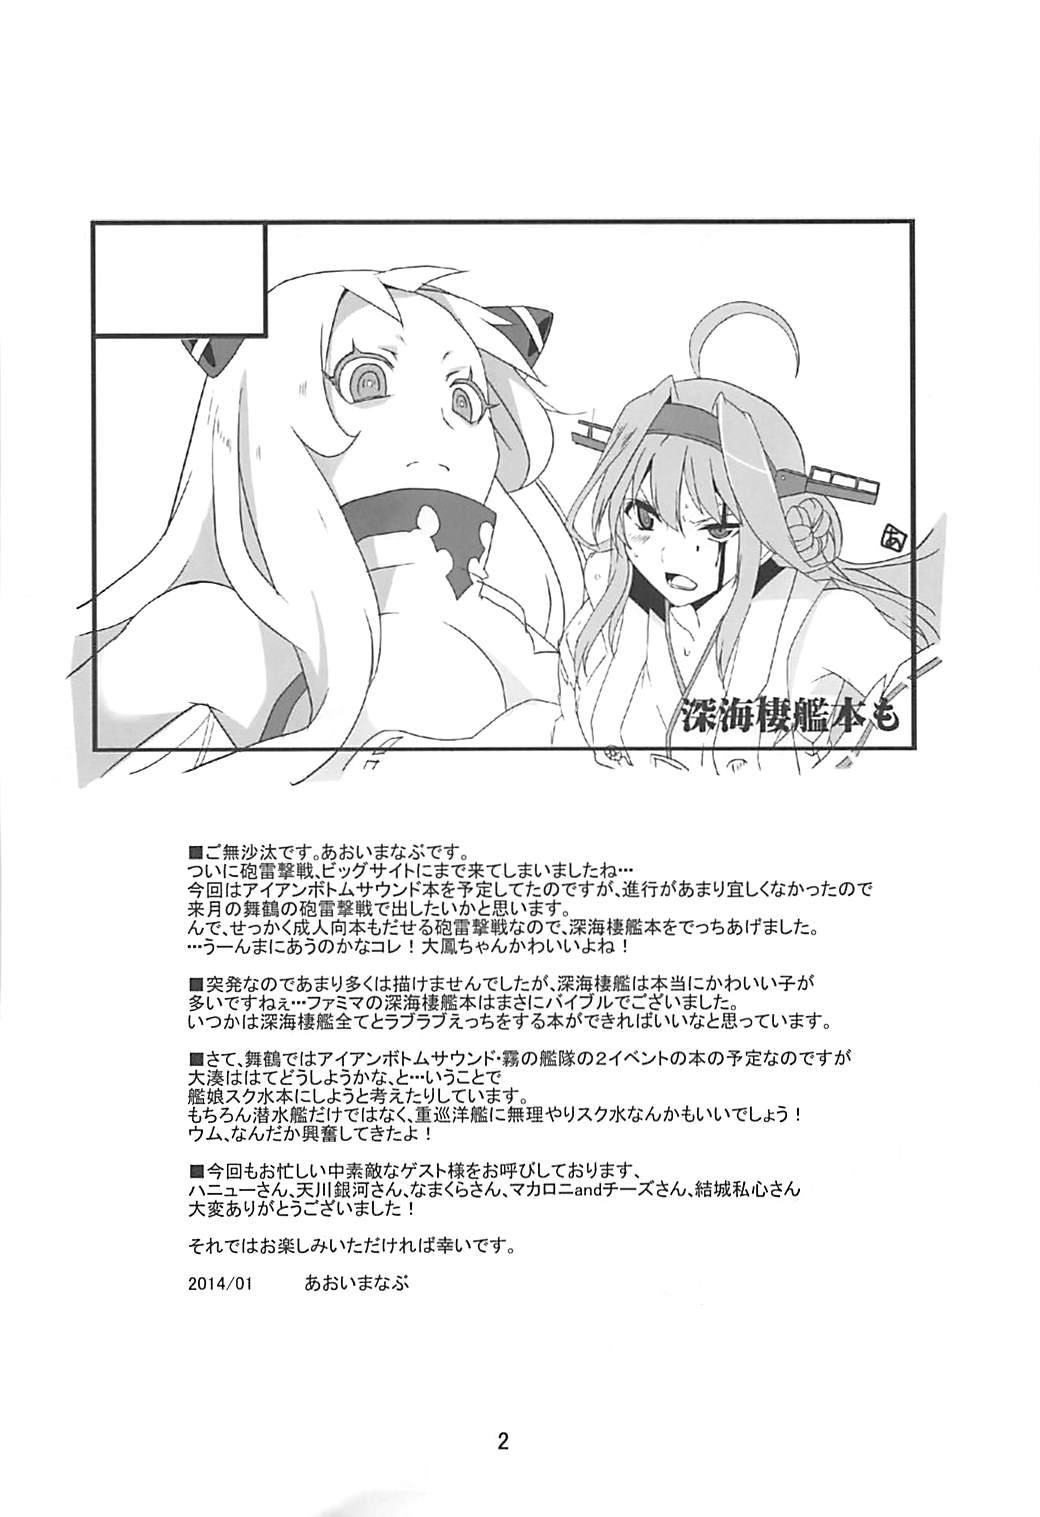 Pregnant ISO - Ironbottom Sound Oppai - Kantai collection Ass Licking - Page 3